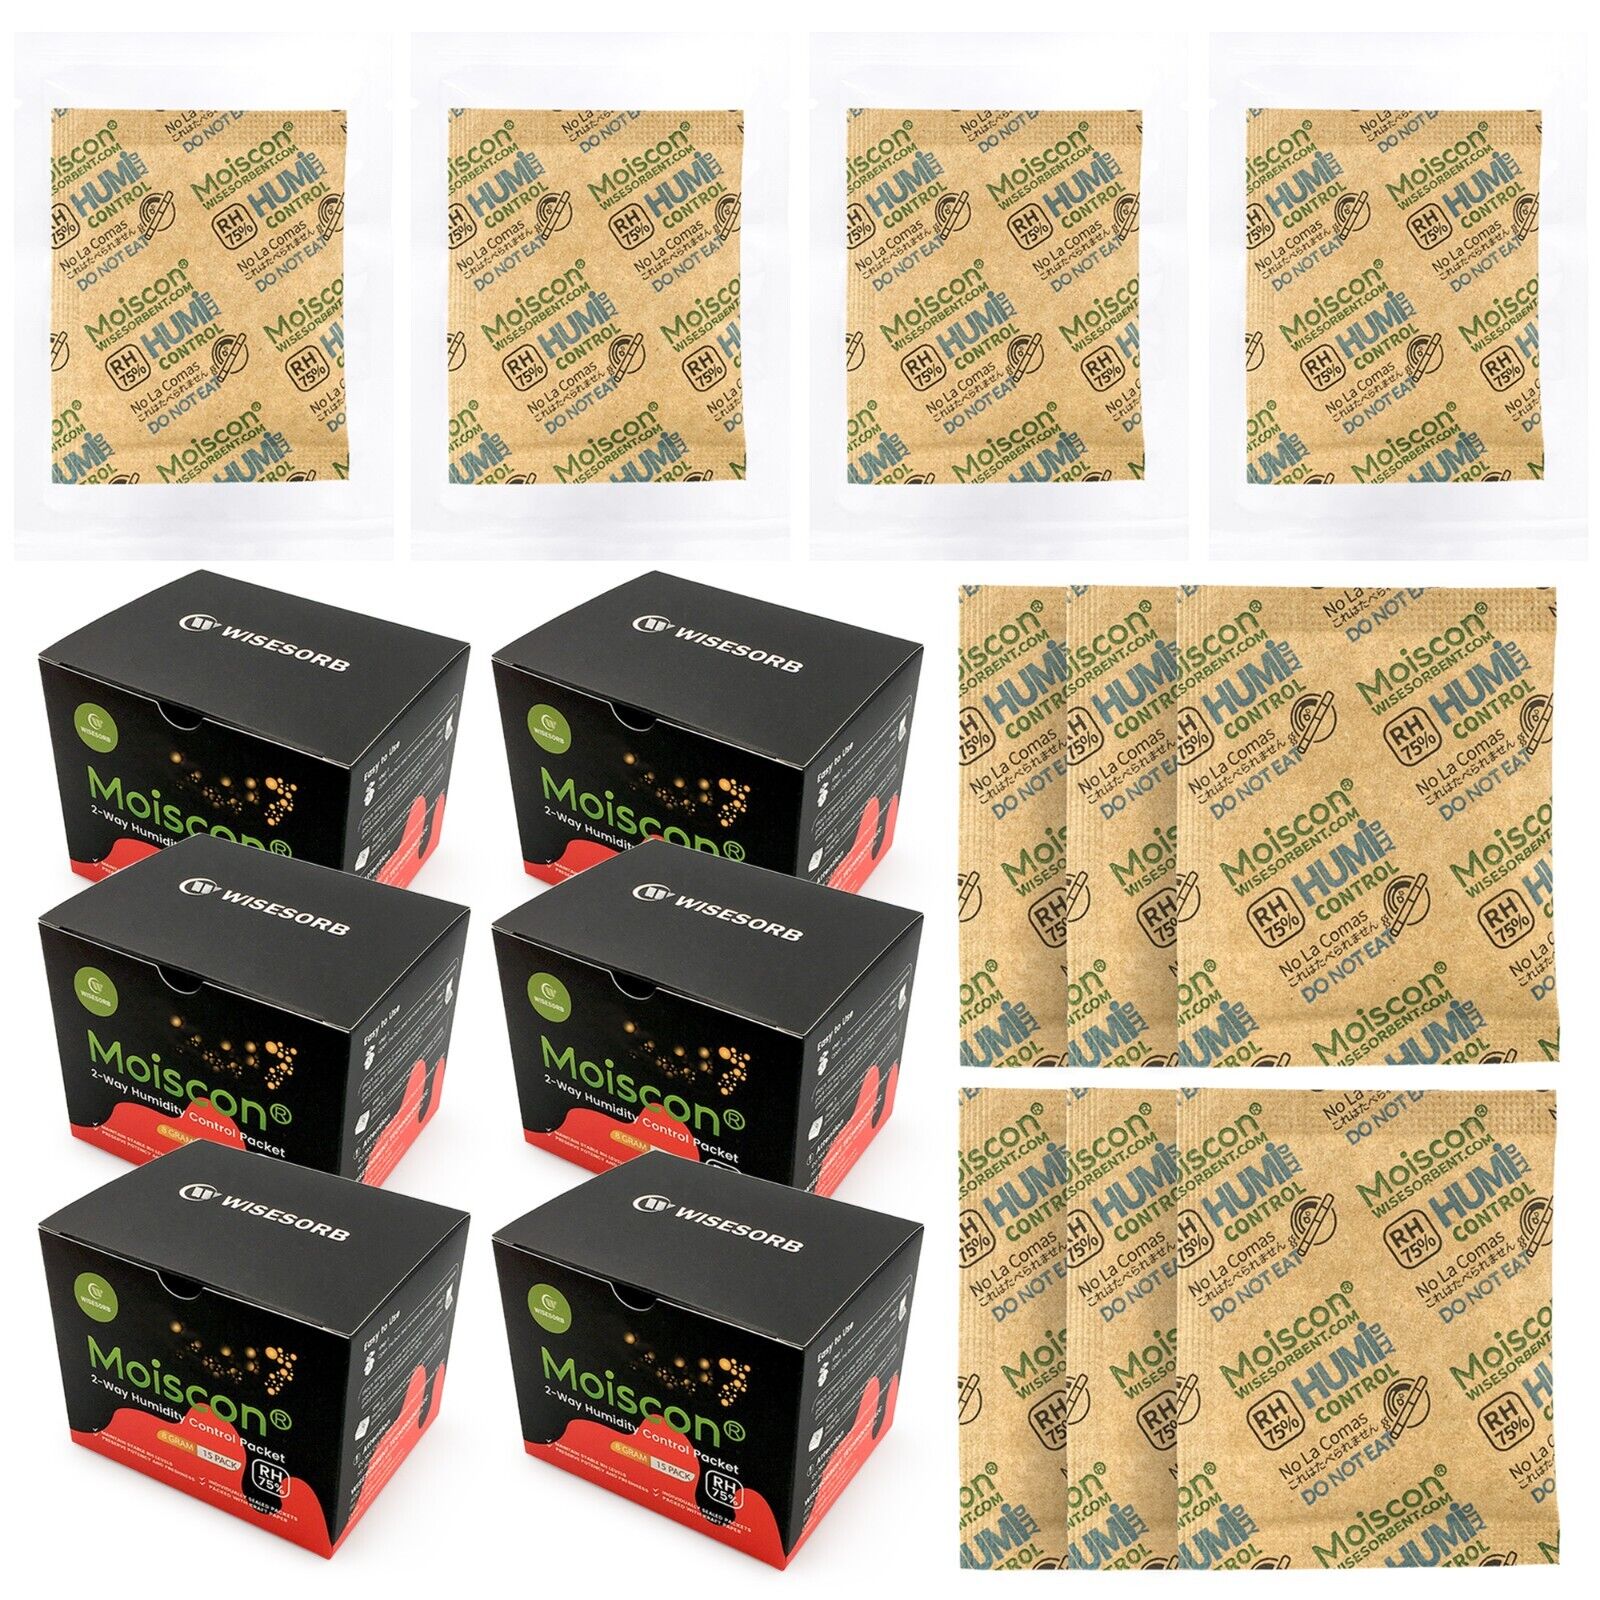 75%RH Two-Way Humidity Control Packs 8 Gram 90 Pack Individually Wrapped